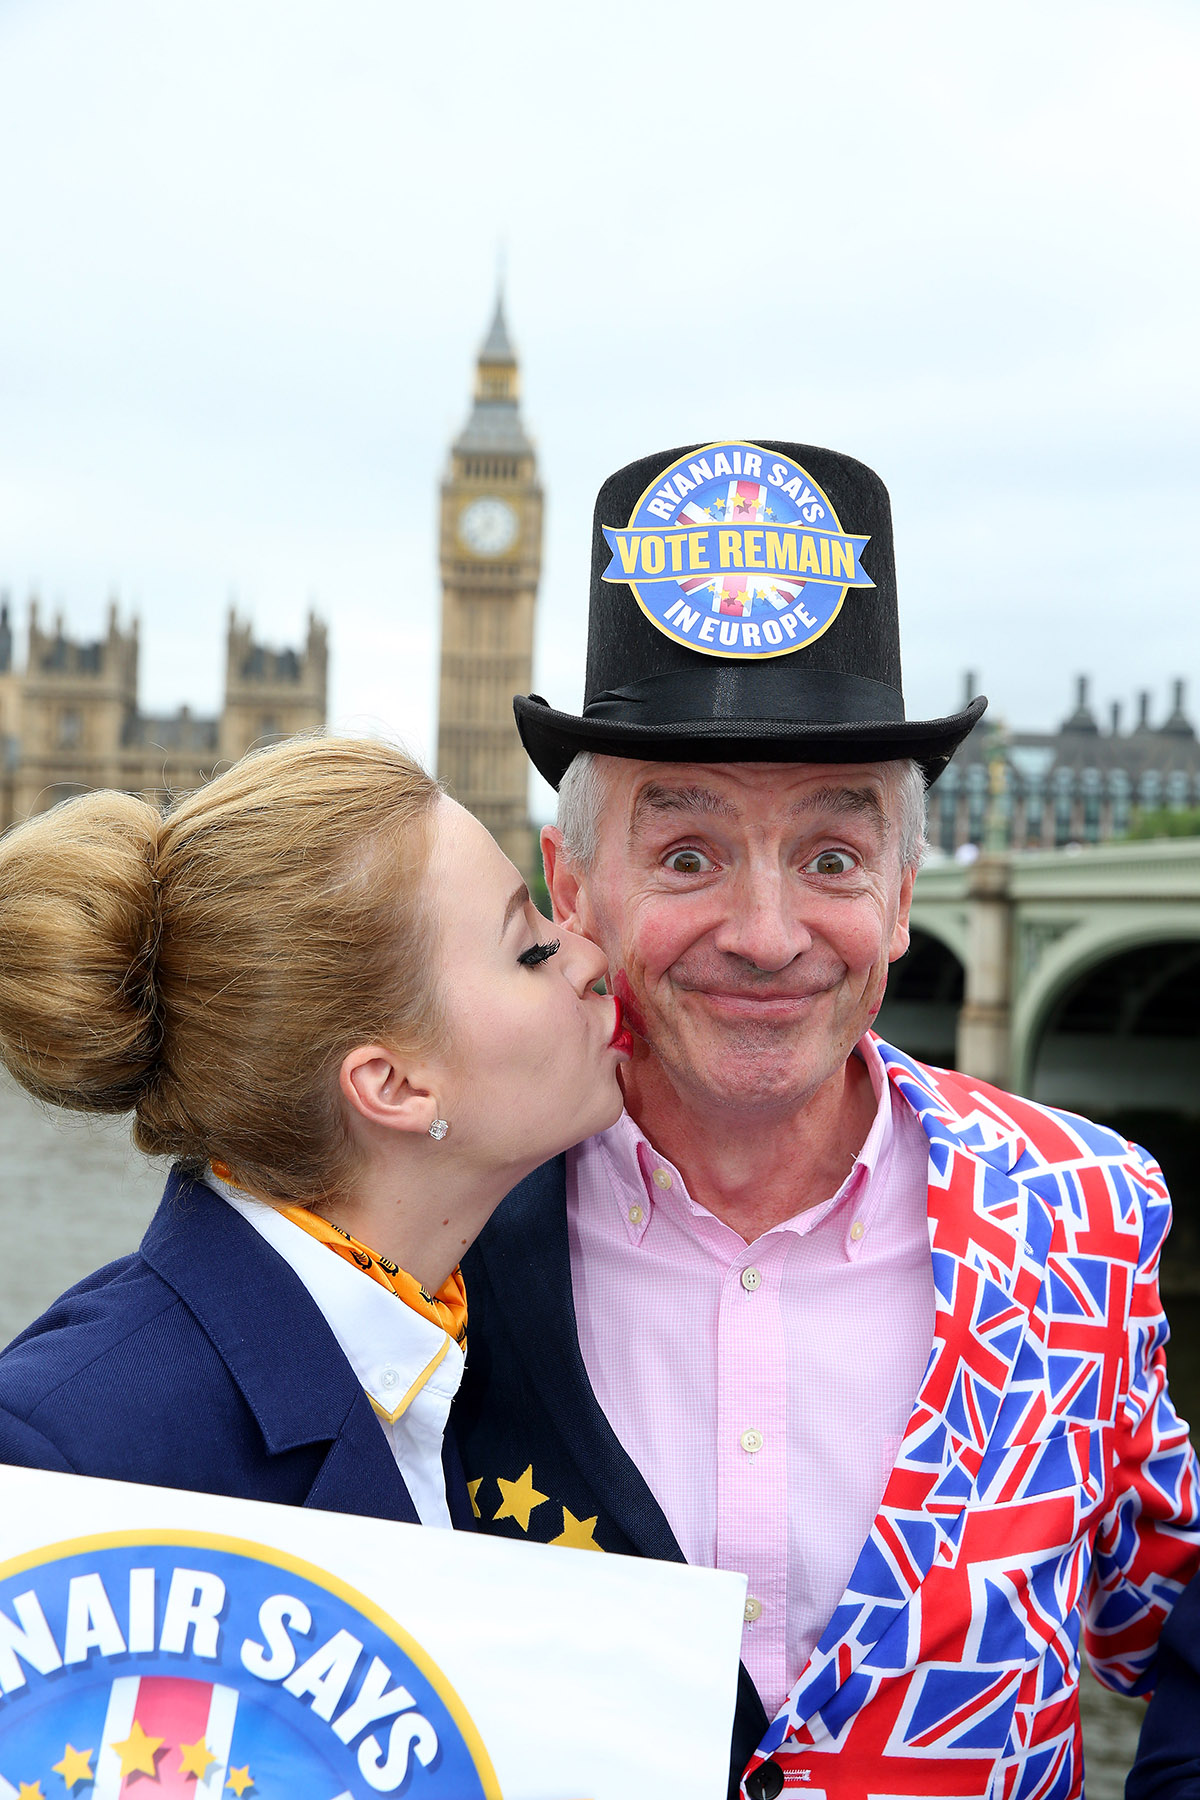 Picture by Philip Hollis for Ryanair   22-6-16 Michael O'Leary Remain photocall Westminster